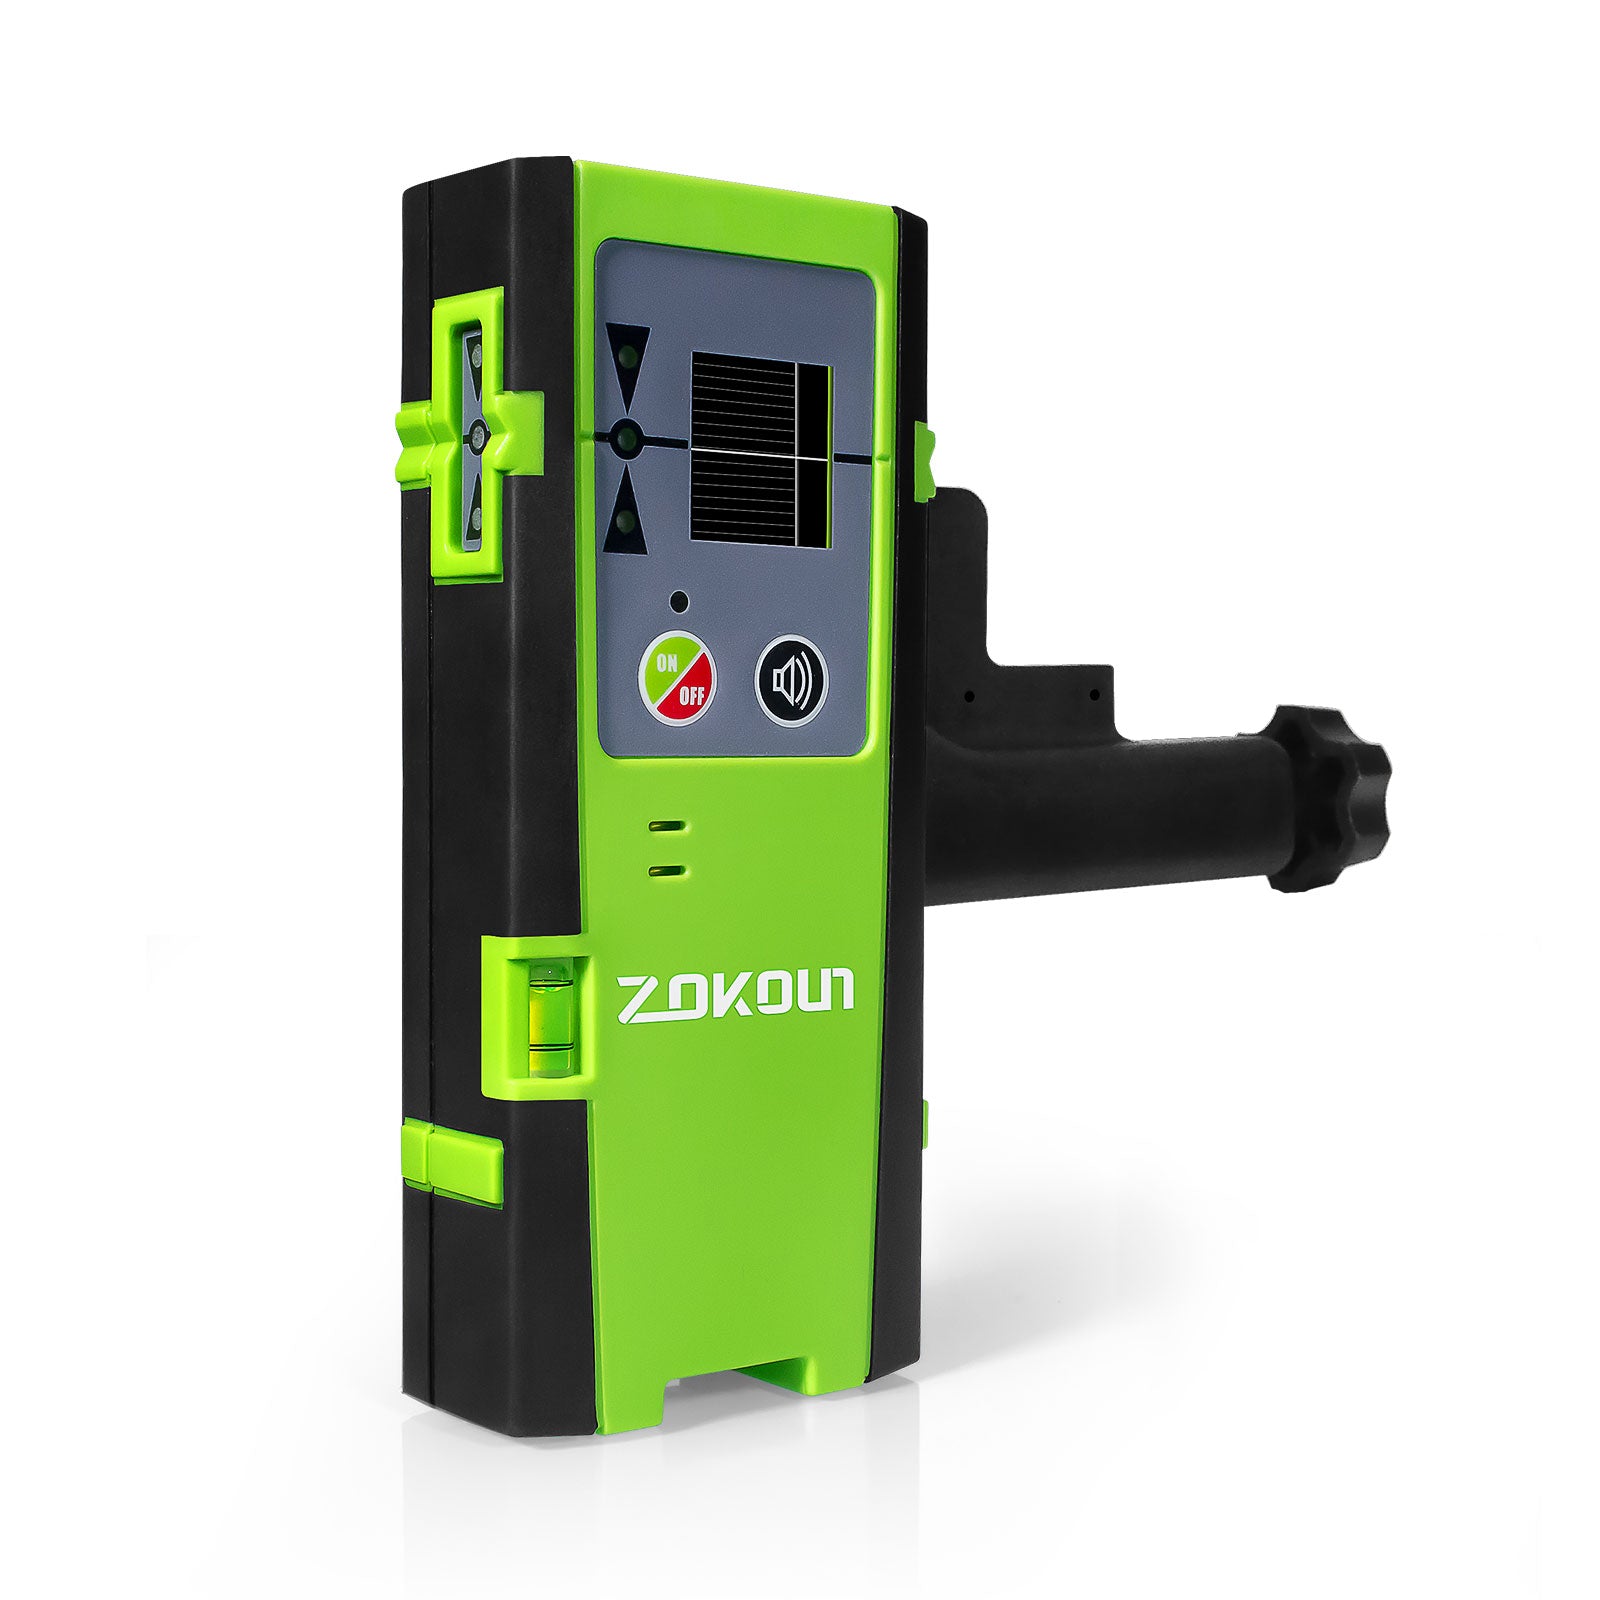 Zokoun DC12G laser receiver ONLY use with Zokoun Line Laser Level(AK1CG/AK2CG/AK360G, IE12/IE16/IE16R, 93T/GF120),50m/164ft (Turn on) Outdoor Pulse Mode